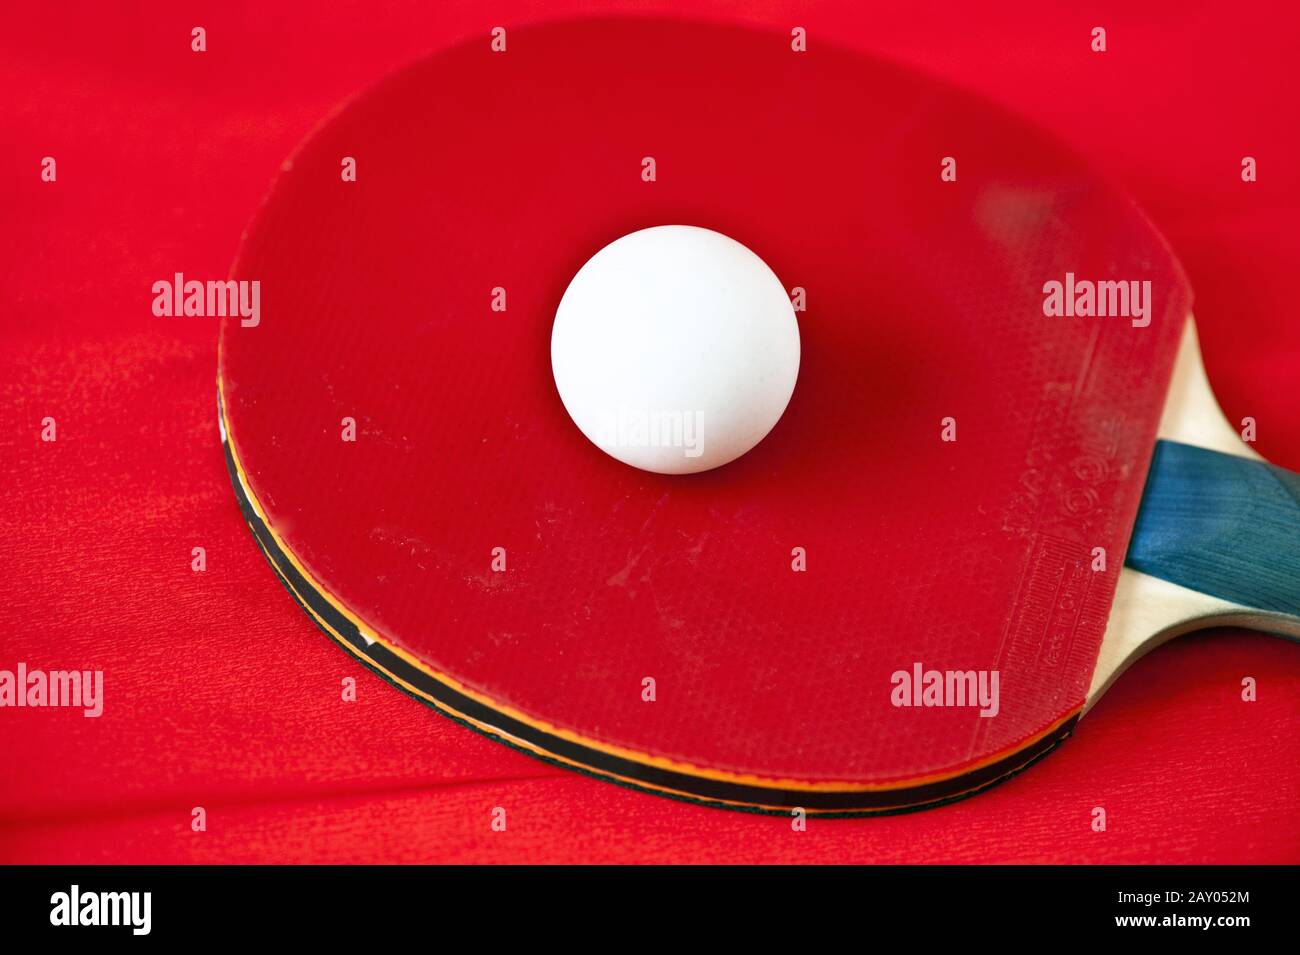 red table tennis bat Stock Photo